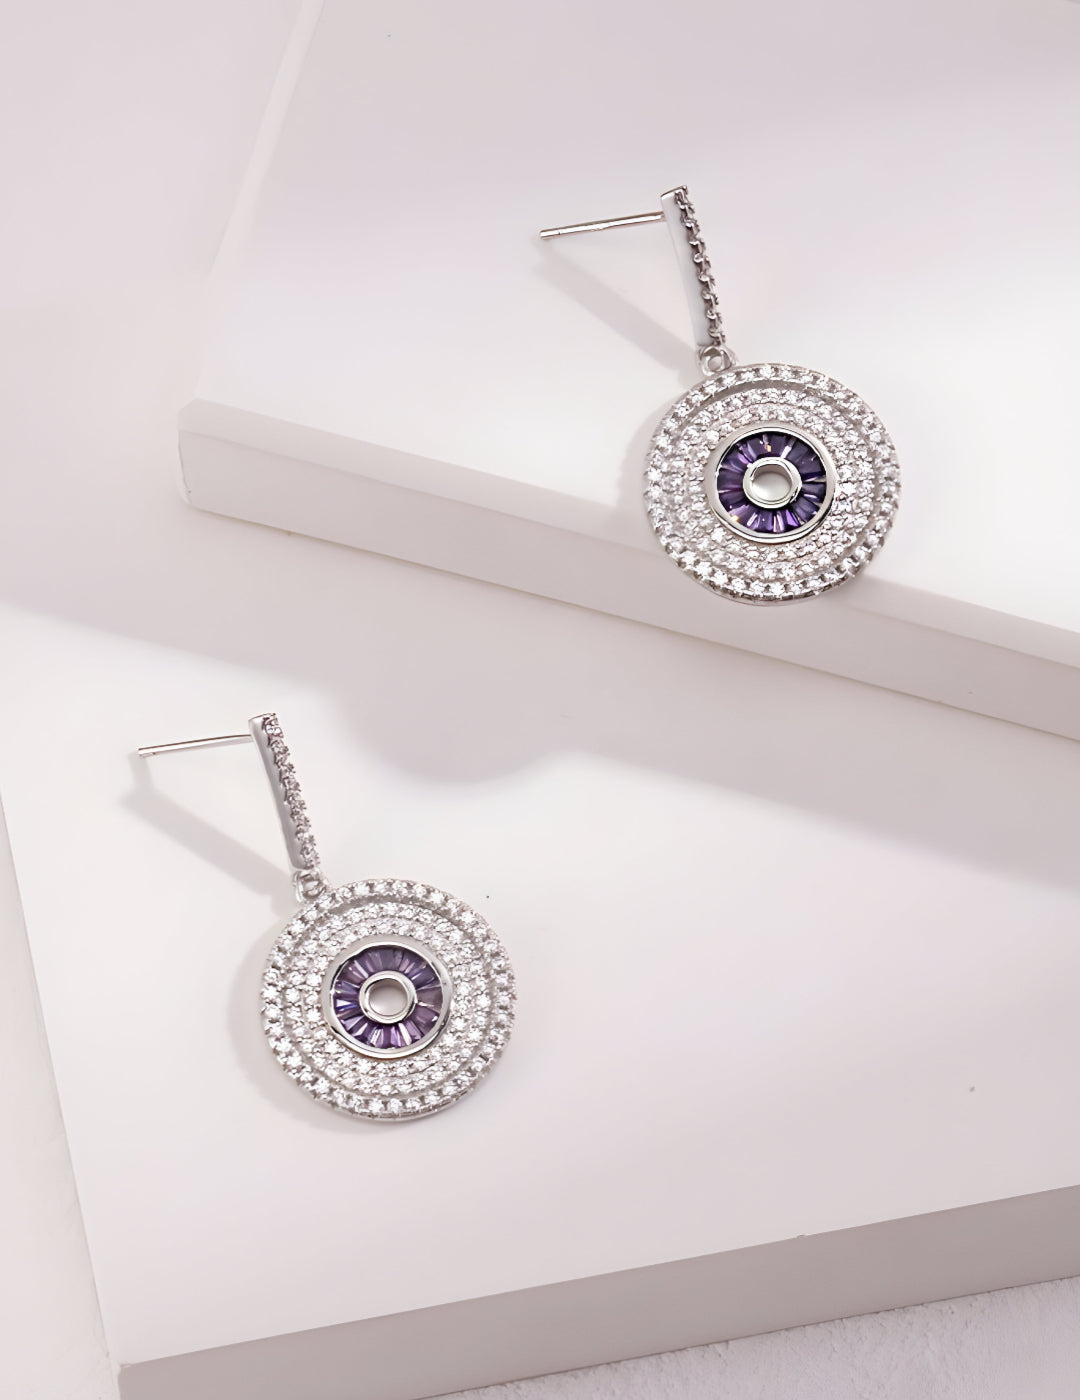  Intricately designed earrings - Chic and Timeless  - Crafted with love and attention to detail, these earrings are perfect for any occasion - S925 Sterling Silver with 18K Gold Vermeil- Sparkling Zircon